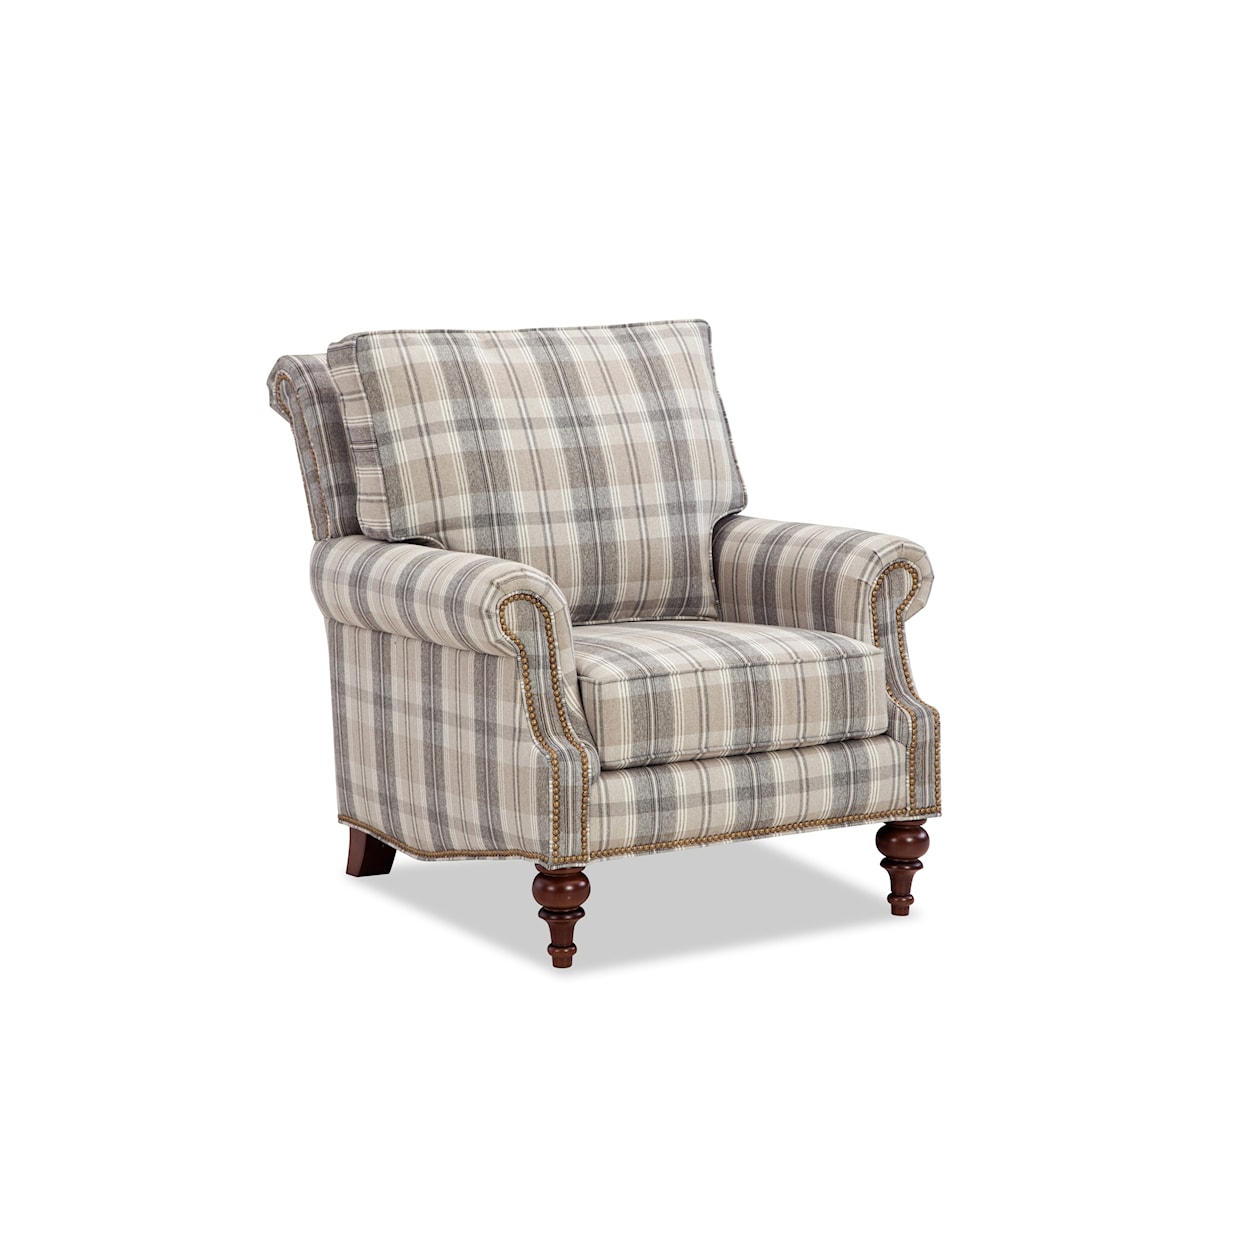 Craftmaster 028210 Accent Chair